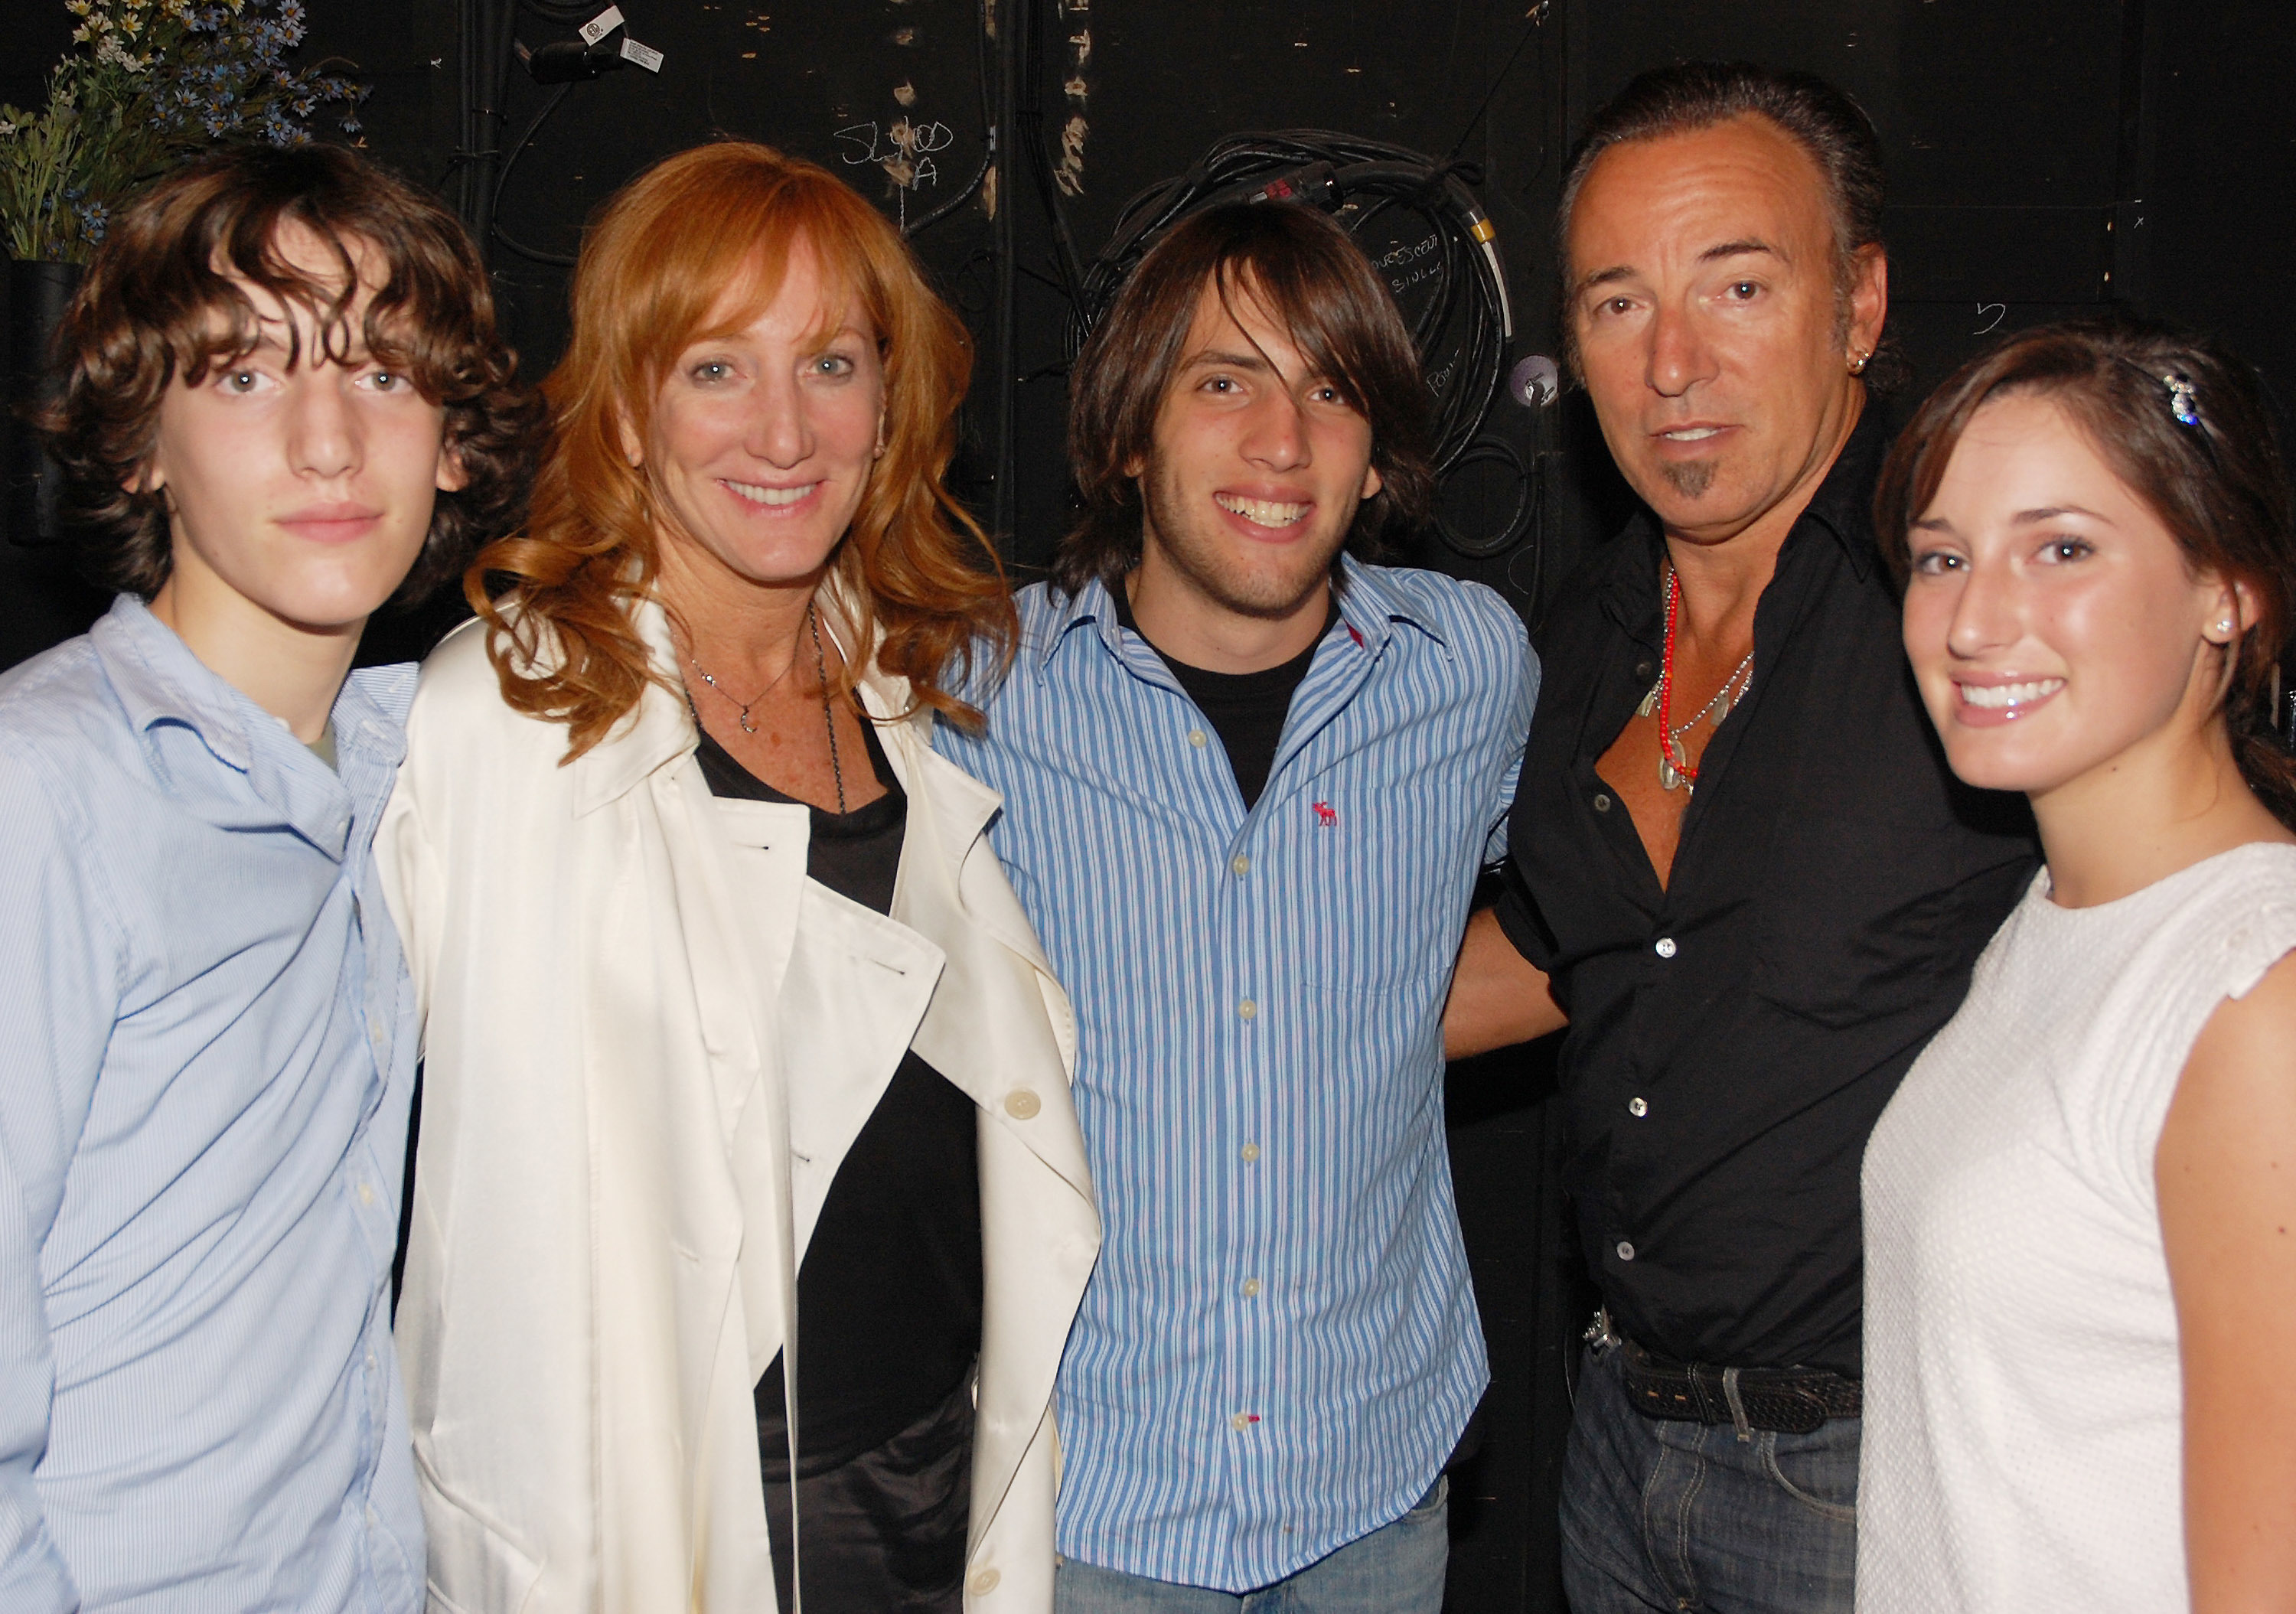 <p>Bruce Springsteen and wife Patti Scialfa posed with their then-teenage kids -- Sam, Evan and Jessica Springsteen -- backstage following a Broadway performance of "Spring Awakening" at the Eugene O'Neill Theater in New York City on Aug. 8, 2008.</p>